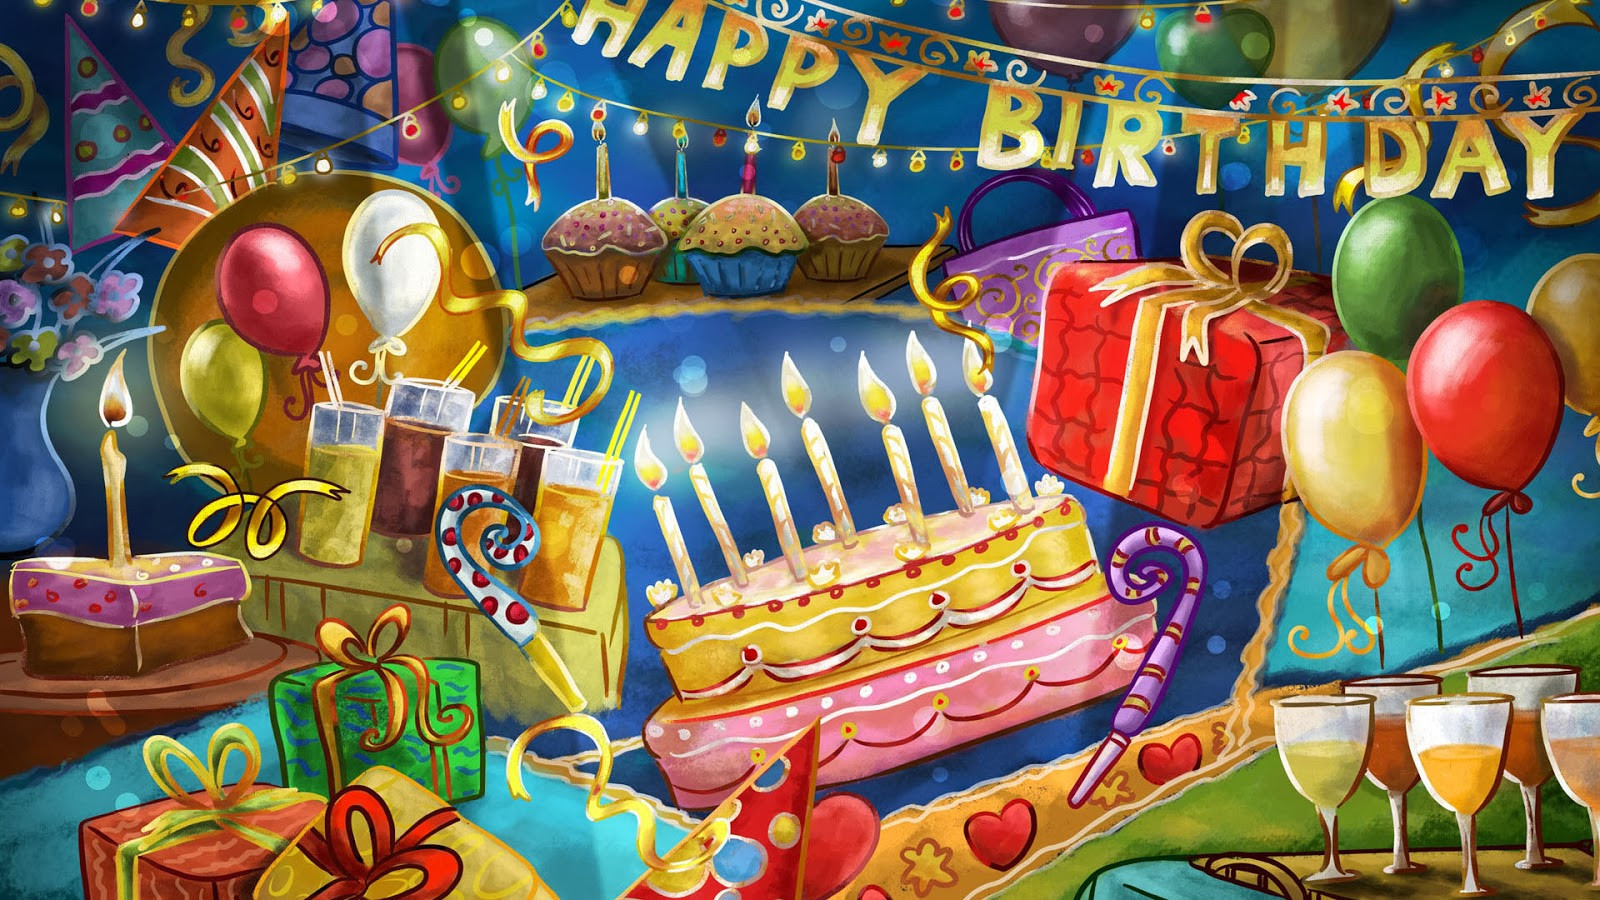 Free Download Birthday Wishes
 Lovable Happy Birthday Greetings free